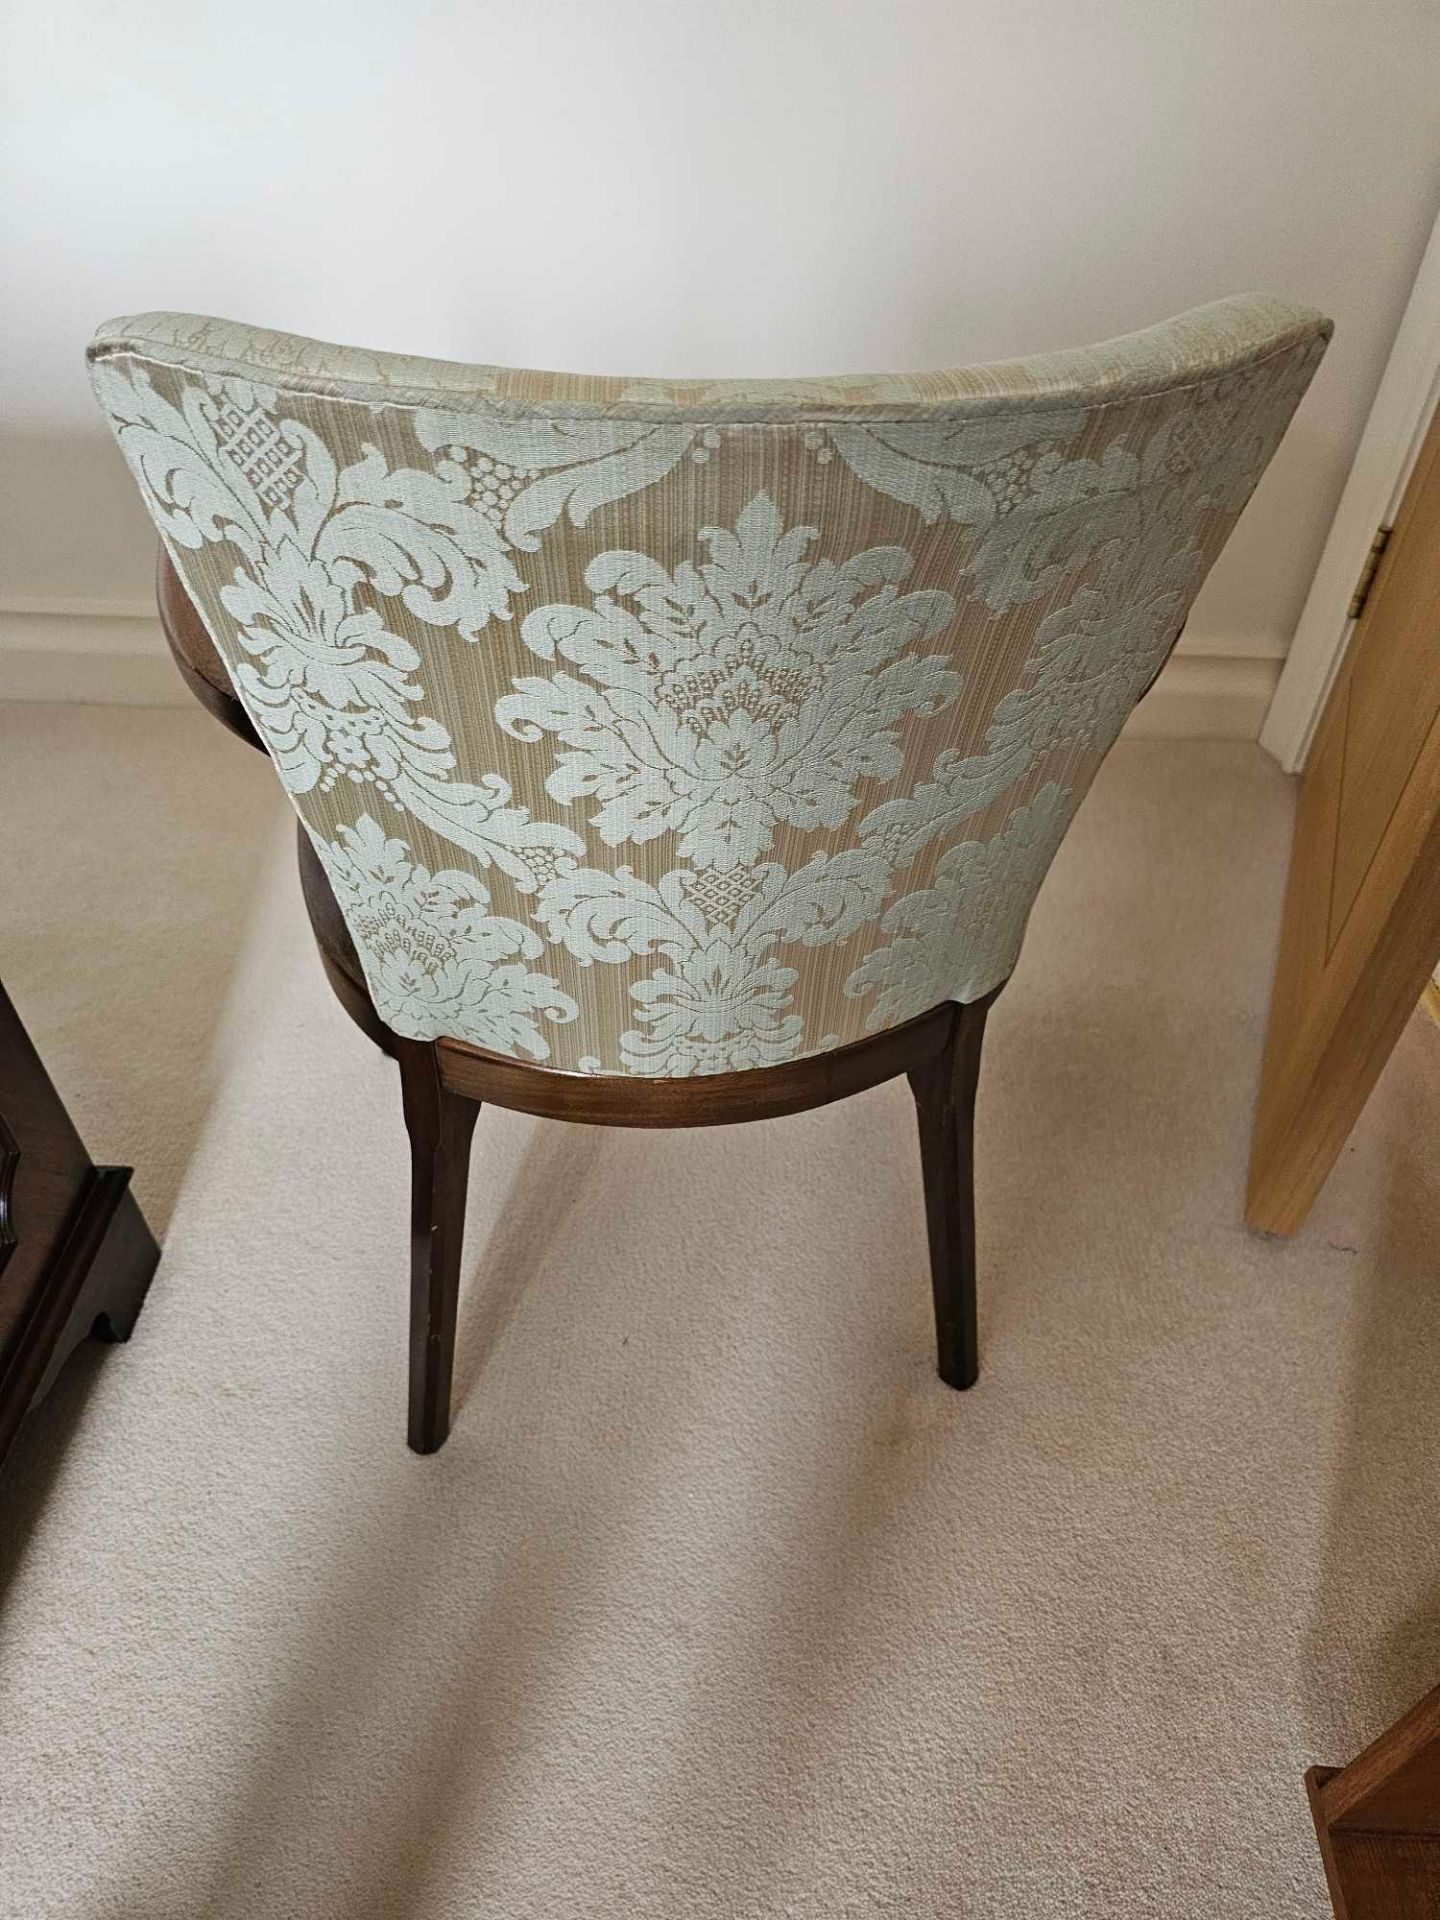 A Parker Knoll Style Armchair Upholstered In A Damask Fabric With Later Replacement Strap Banding To - Image 5 of 5